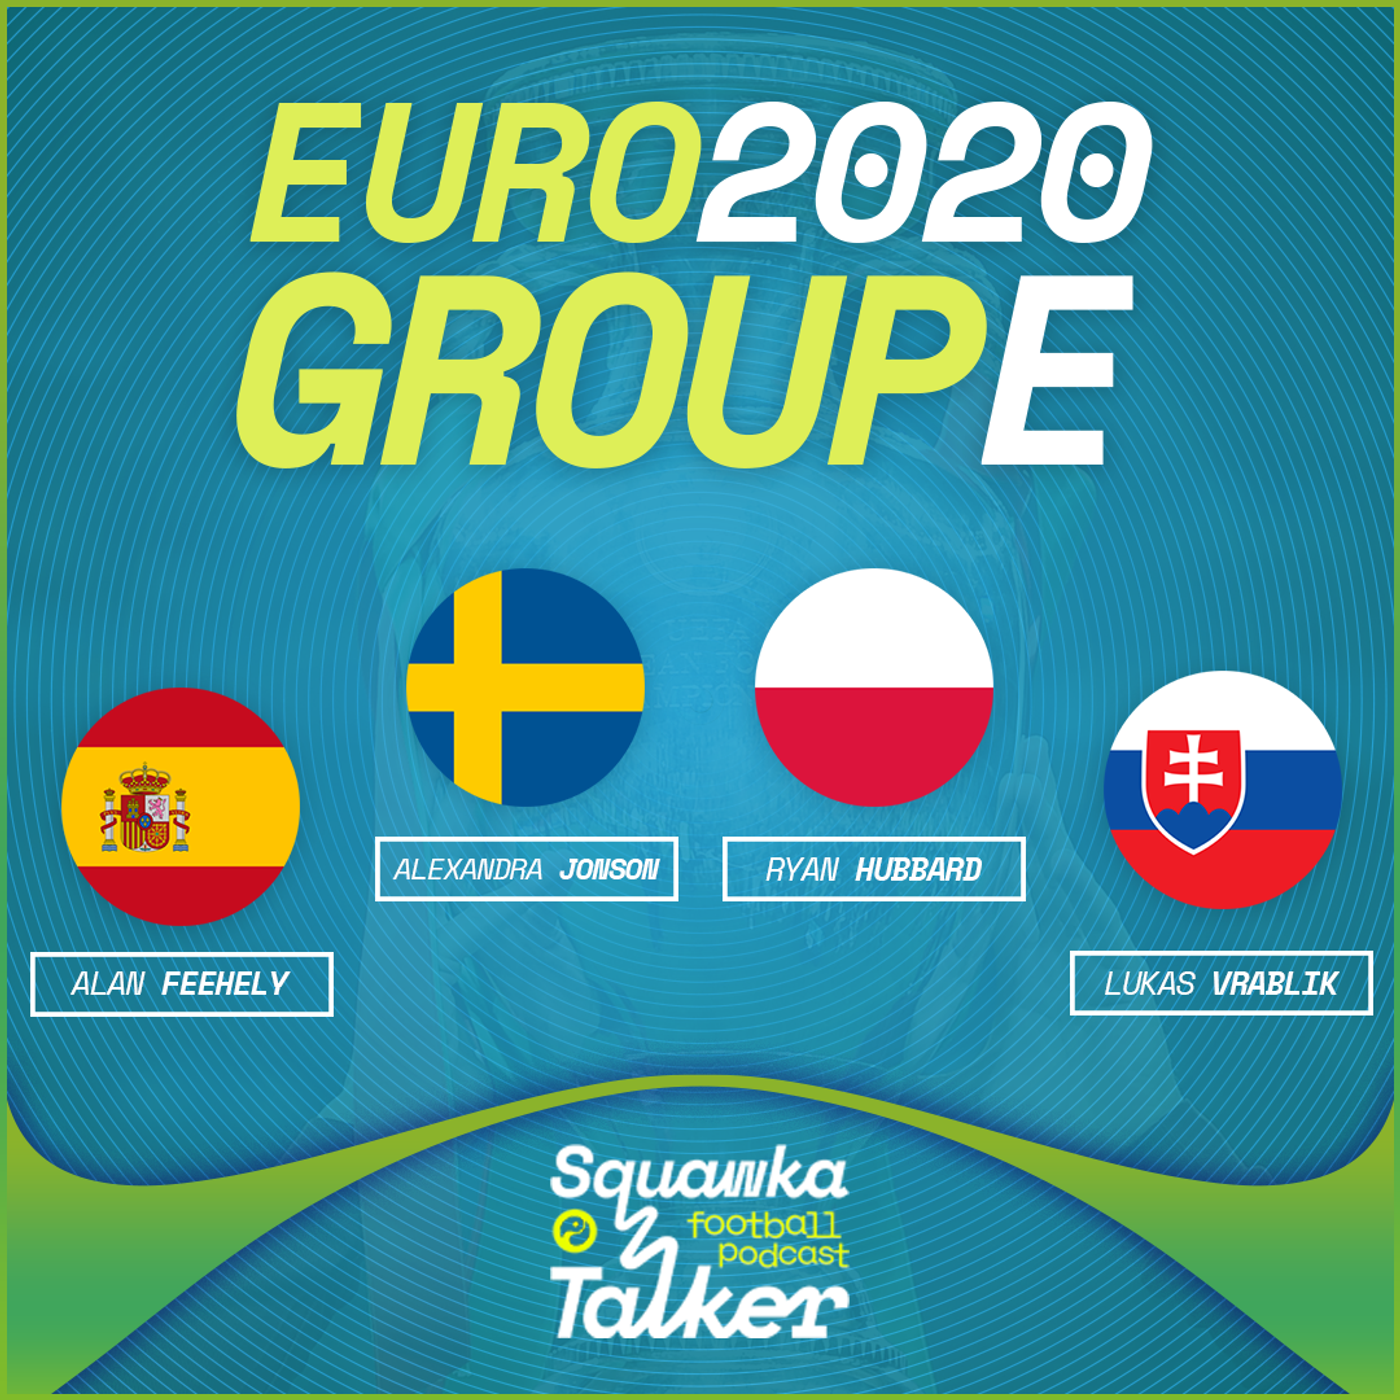 EURO 2020: Your complete guide to Group E